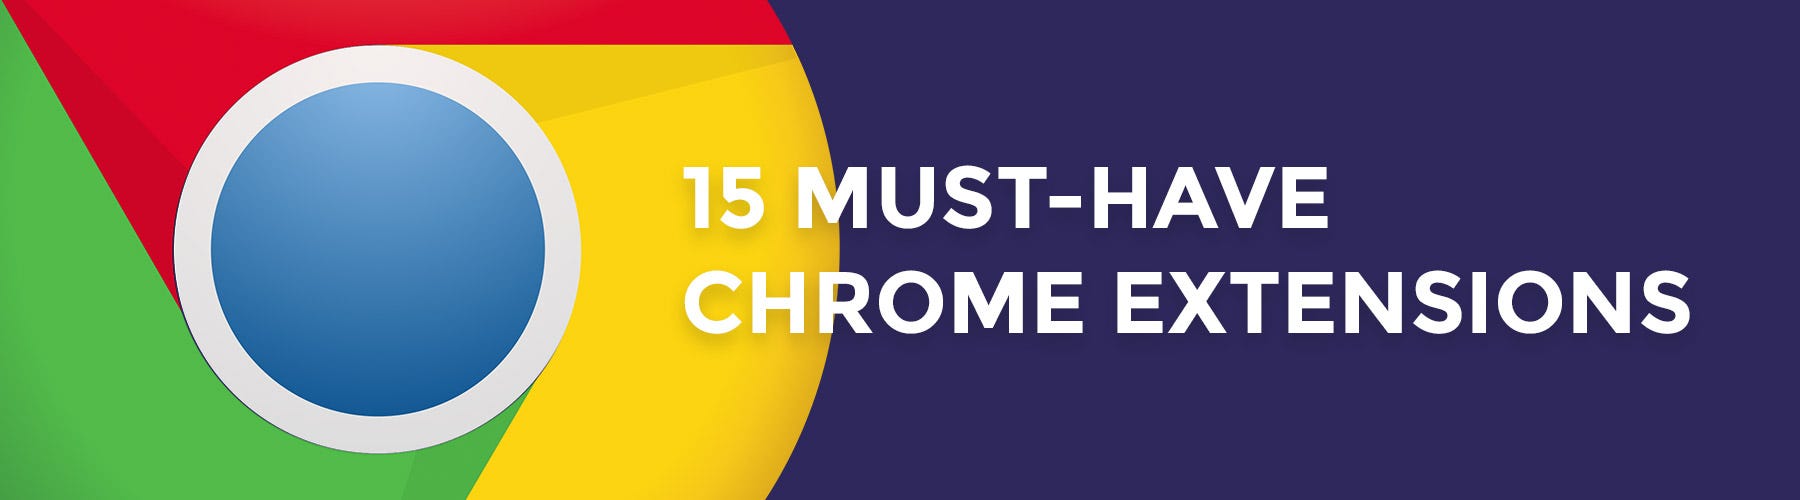 Top 10 Chrome extensions for web designers